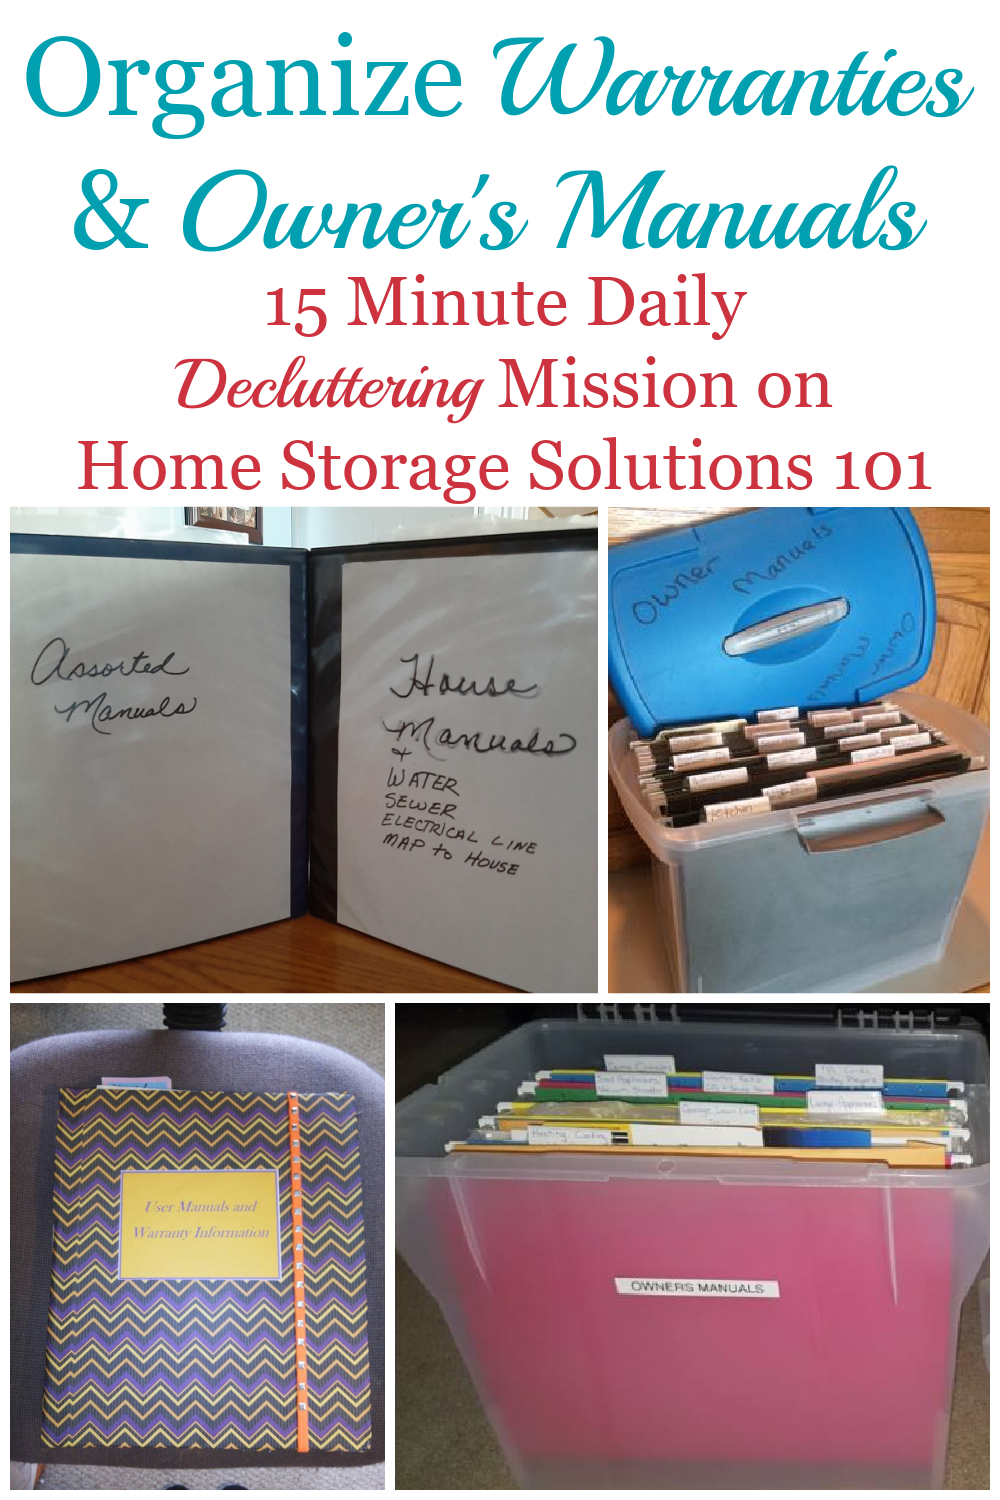 Organize warranties and owner's manuals {a #Declutter365 mission on Home Storage Solutions 101}